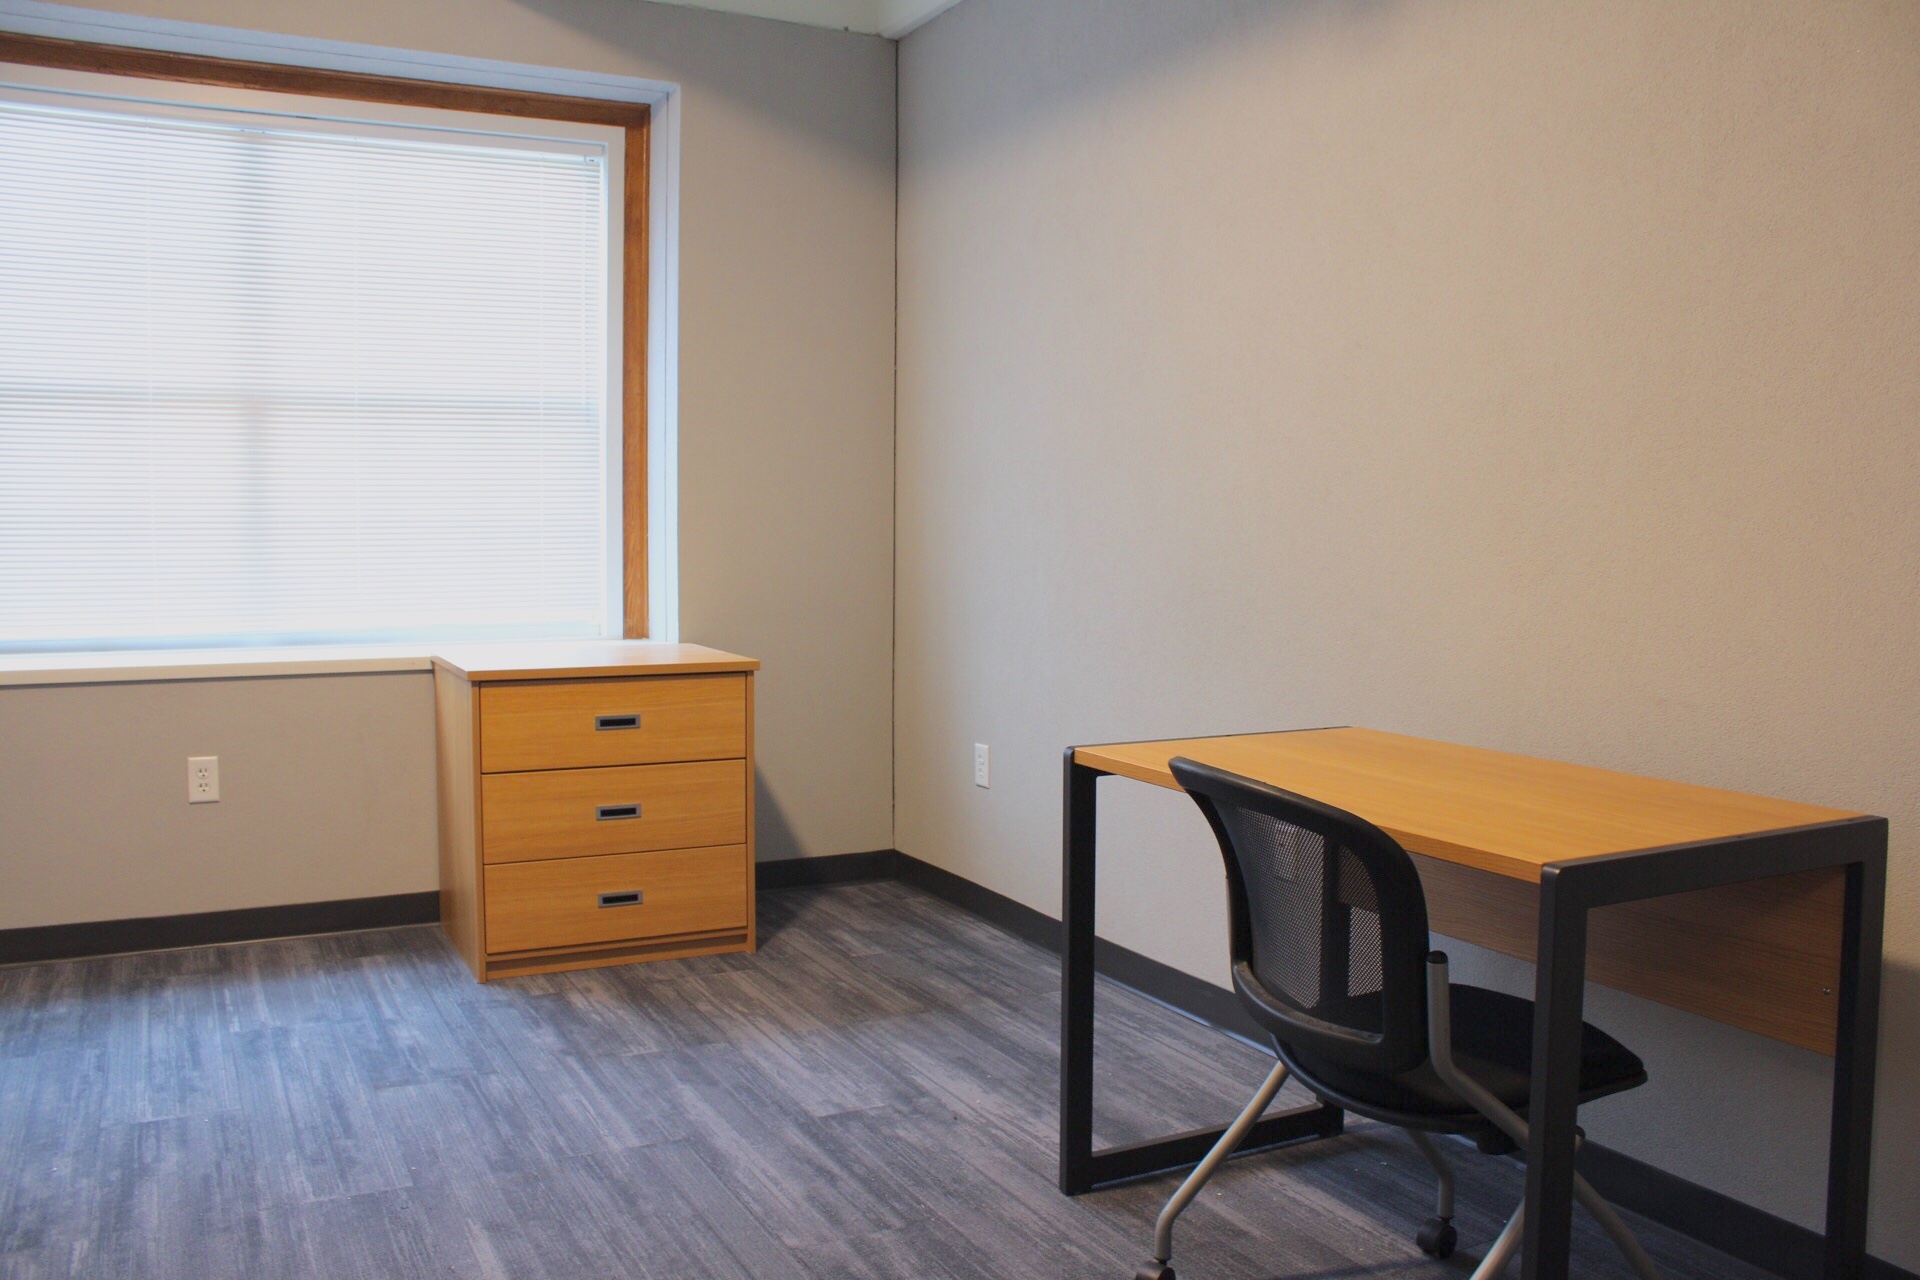 Delzell Hall room with 3-drawer dresser and desk table and chair.